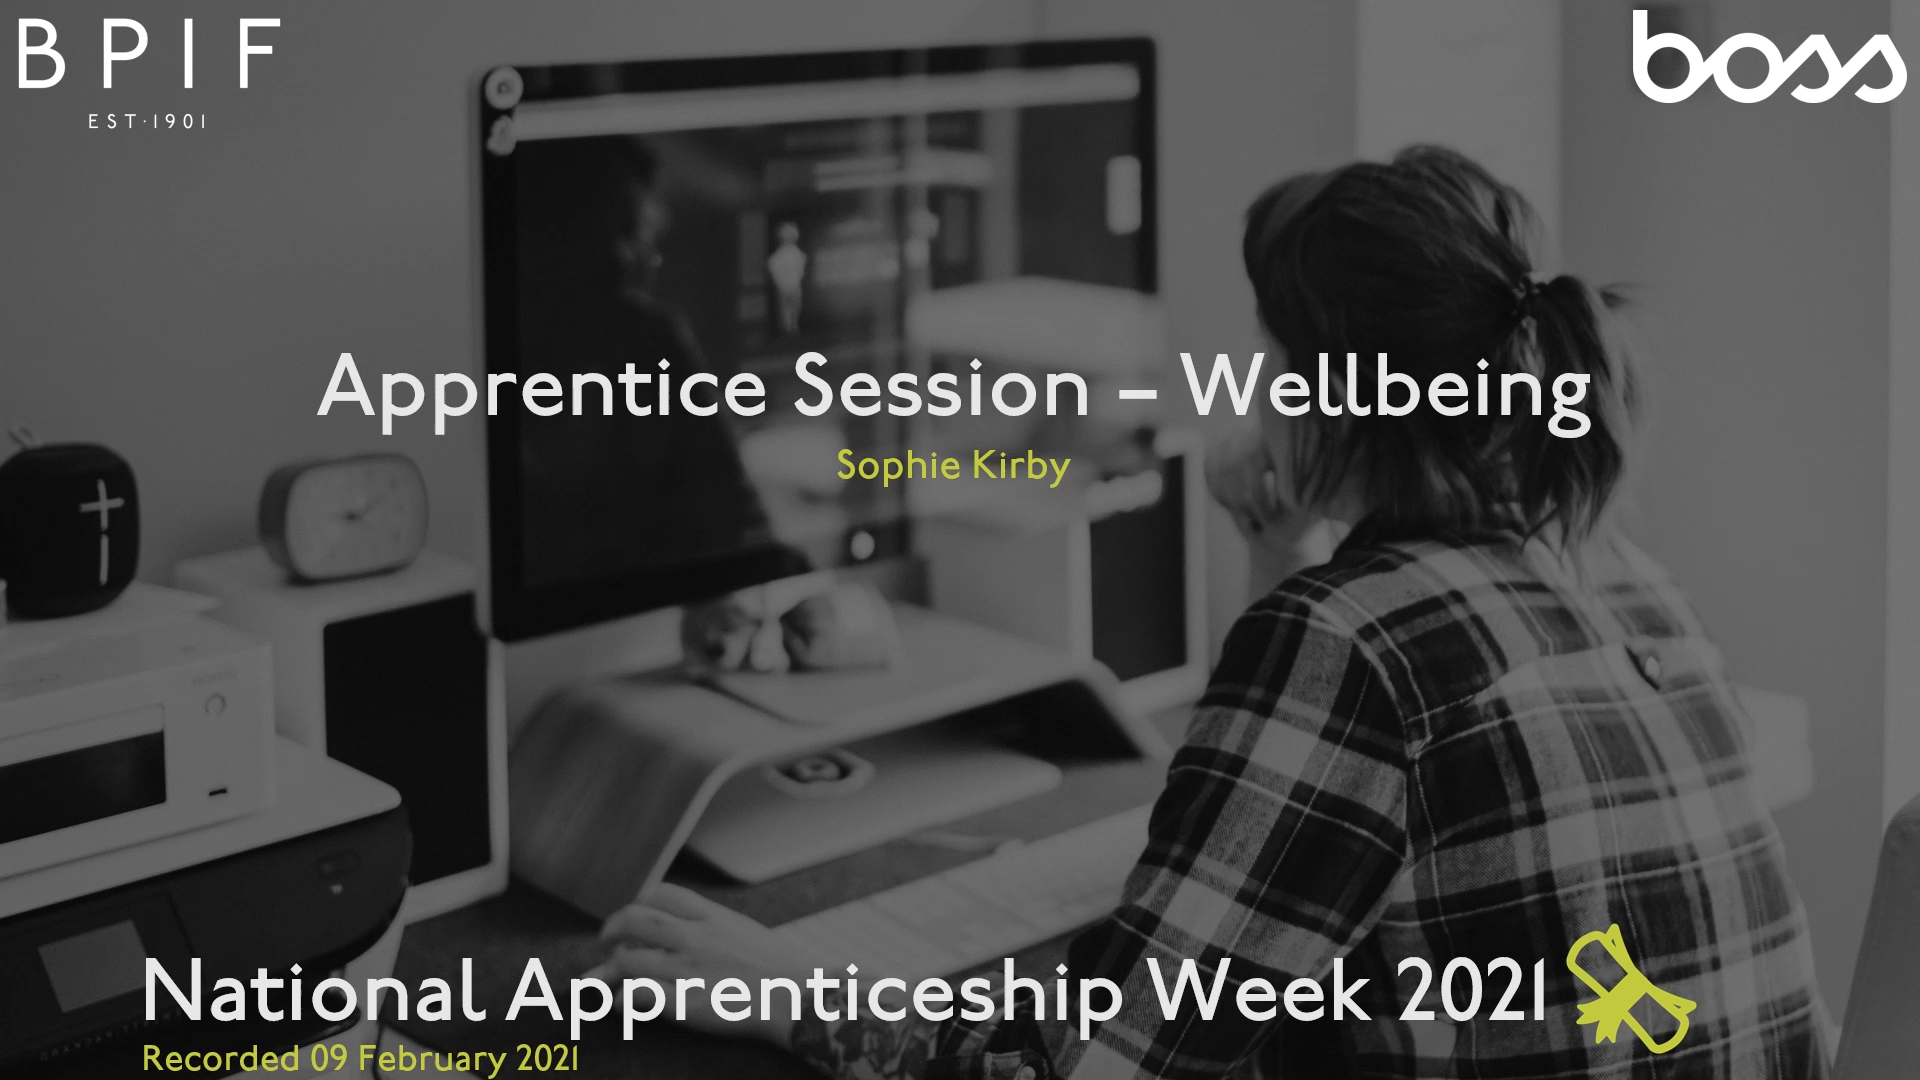 Apprentice Session - Wellbeing